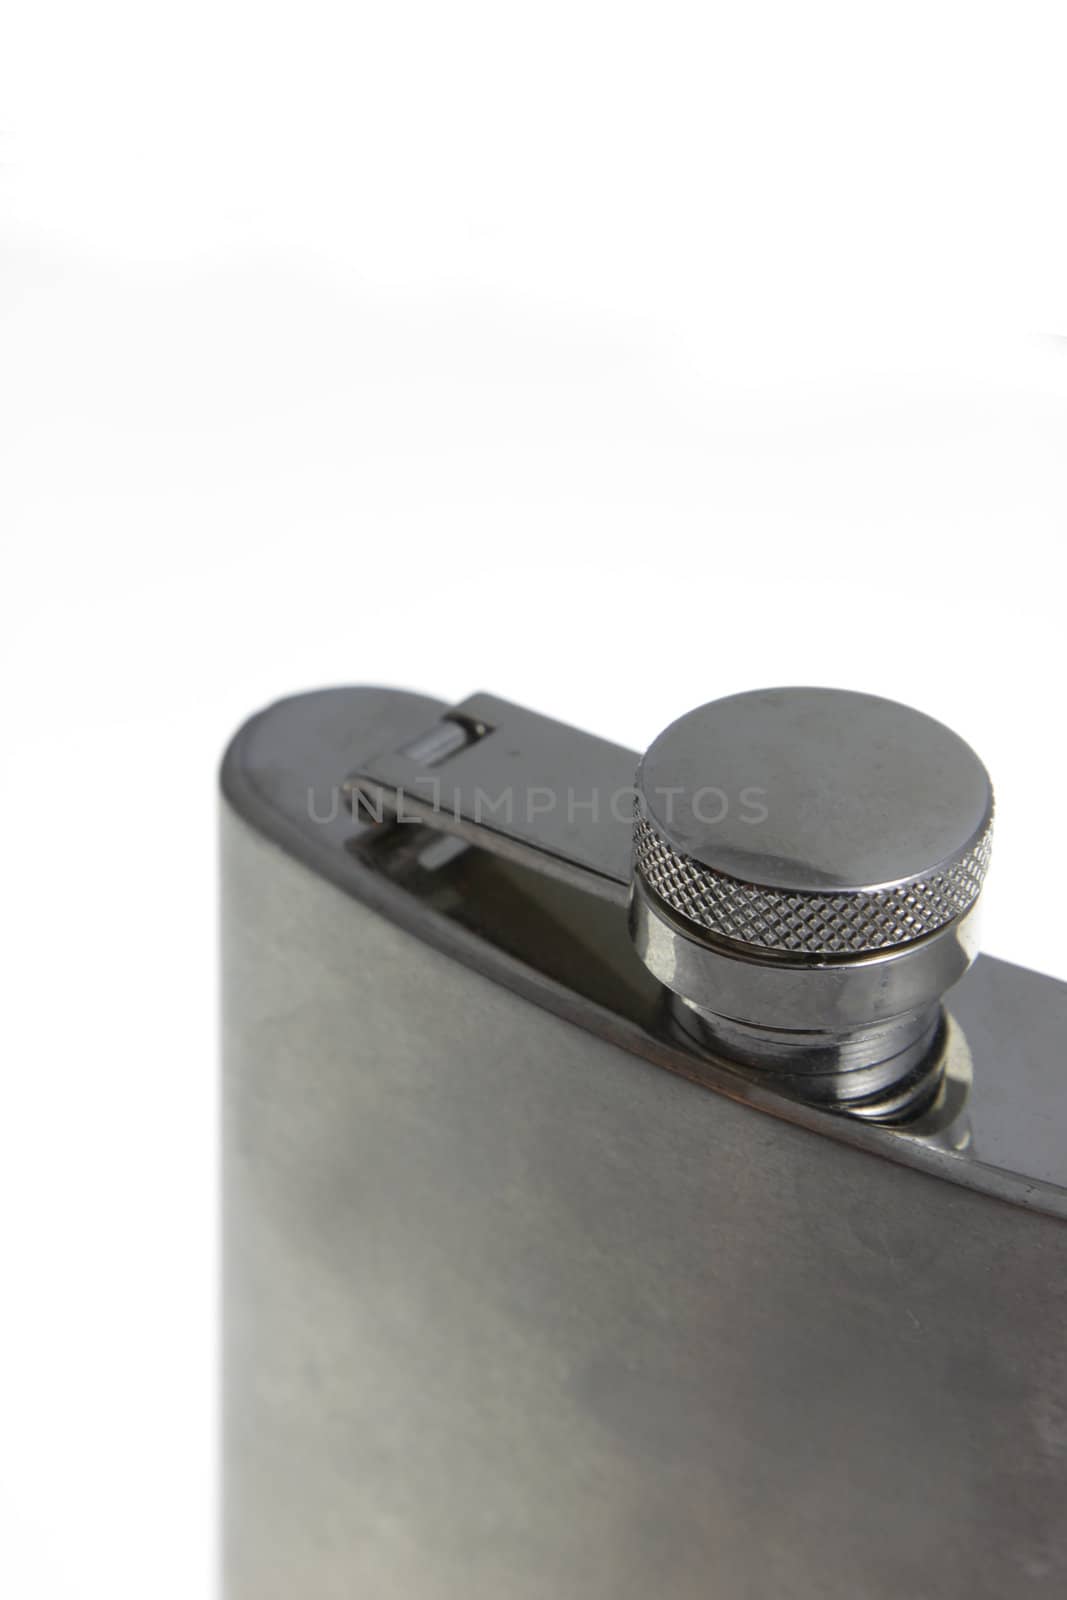 Top of a Hip Flask
 by ca2hill